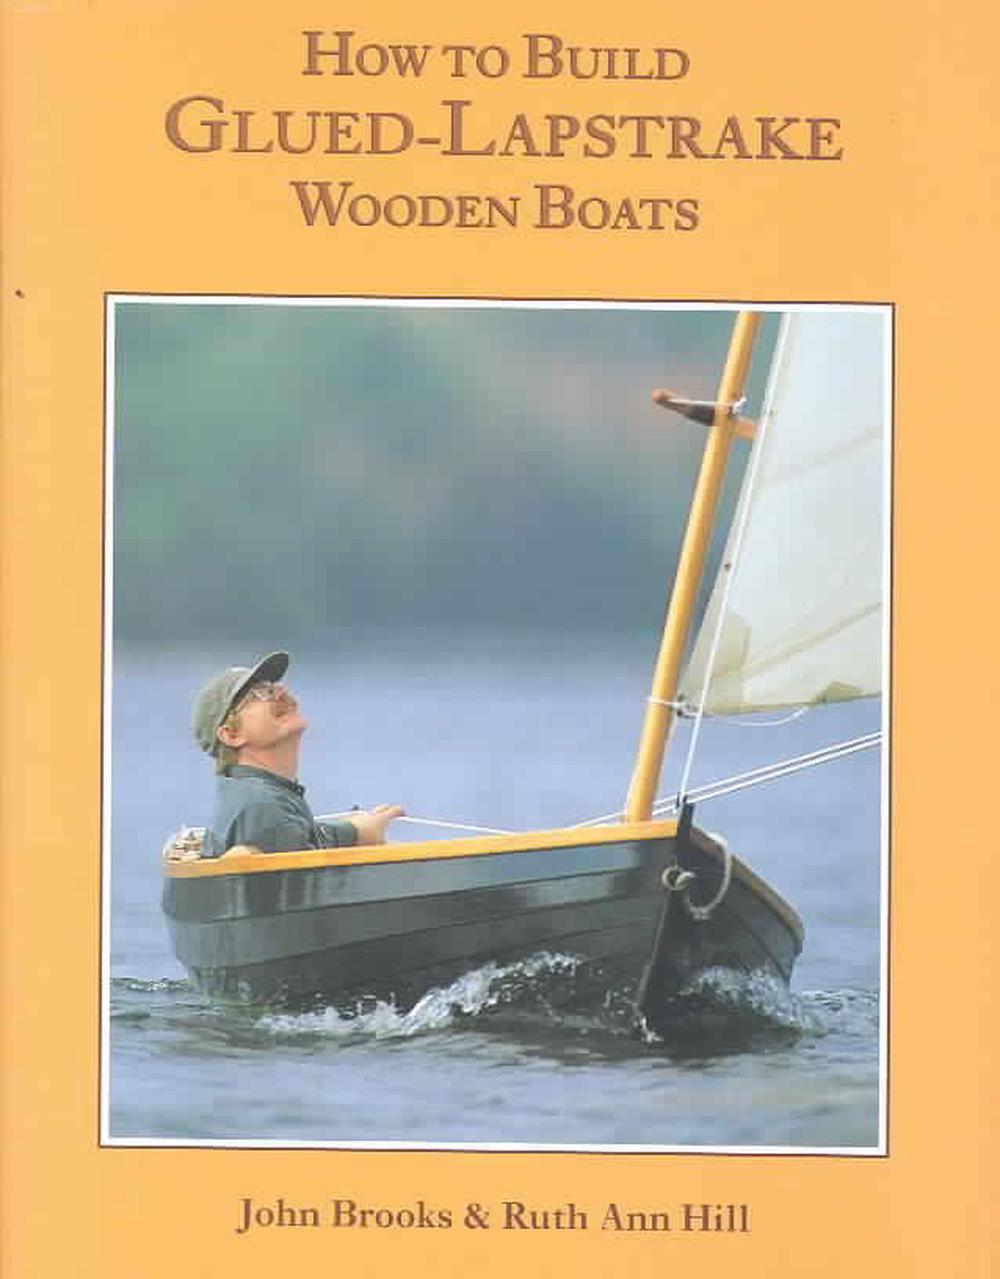 How to Build Glued-Lapstrake Wooden Boats by John Brooks 